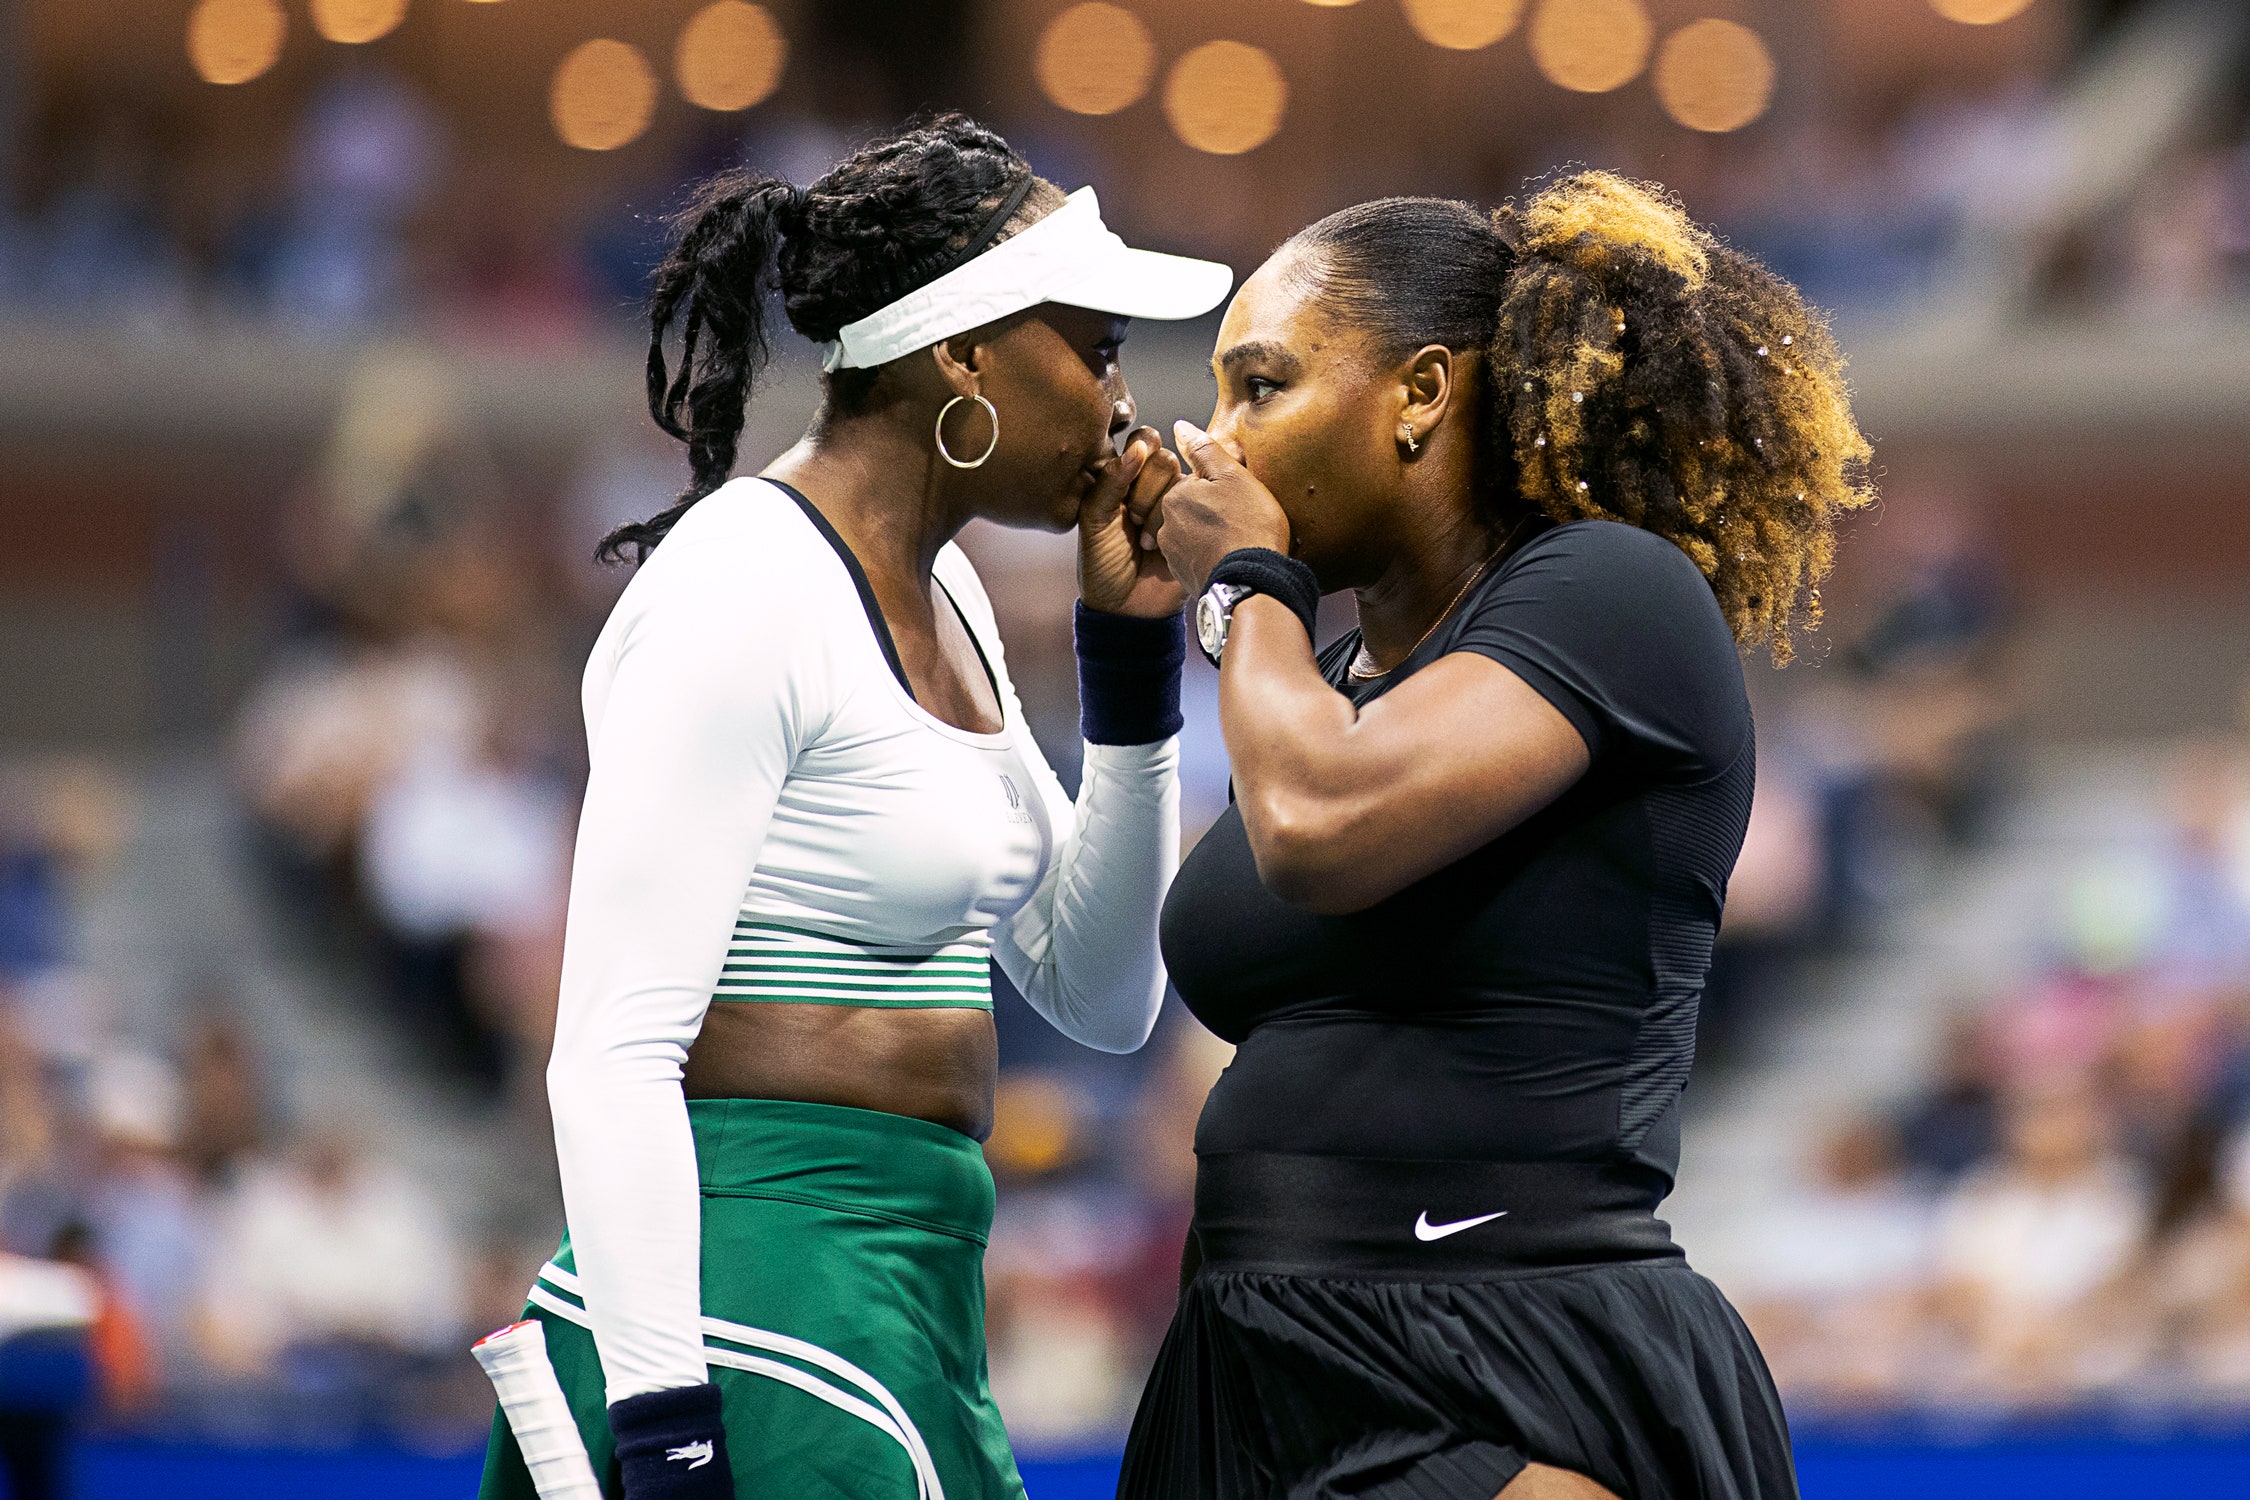 Taydaica Venus Williams Inspires Serena Williams Personal Motivation After Her Siblings Early Tennis Success 65c97b8124ff2 